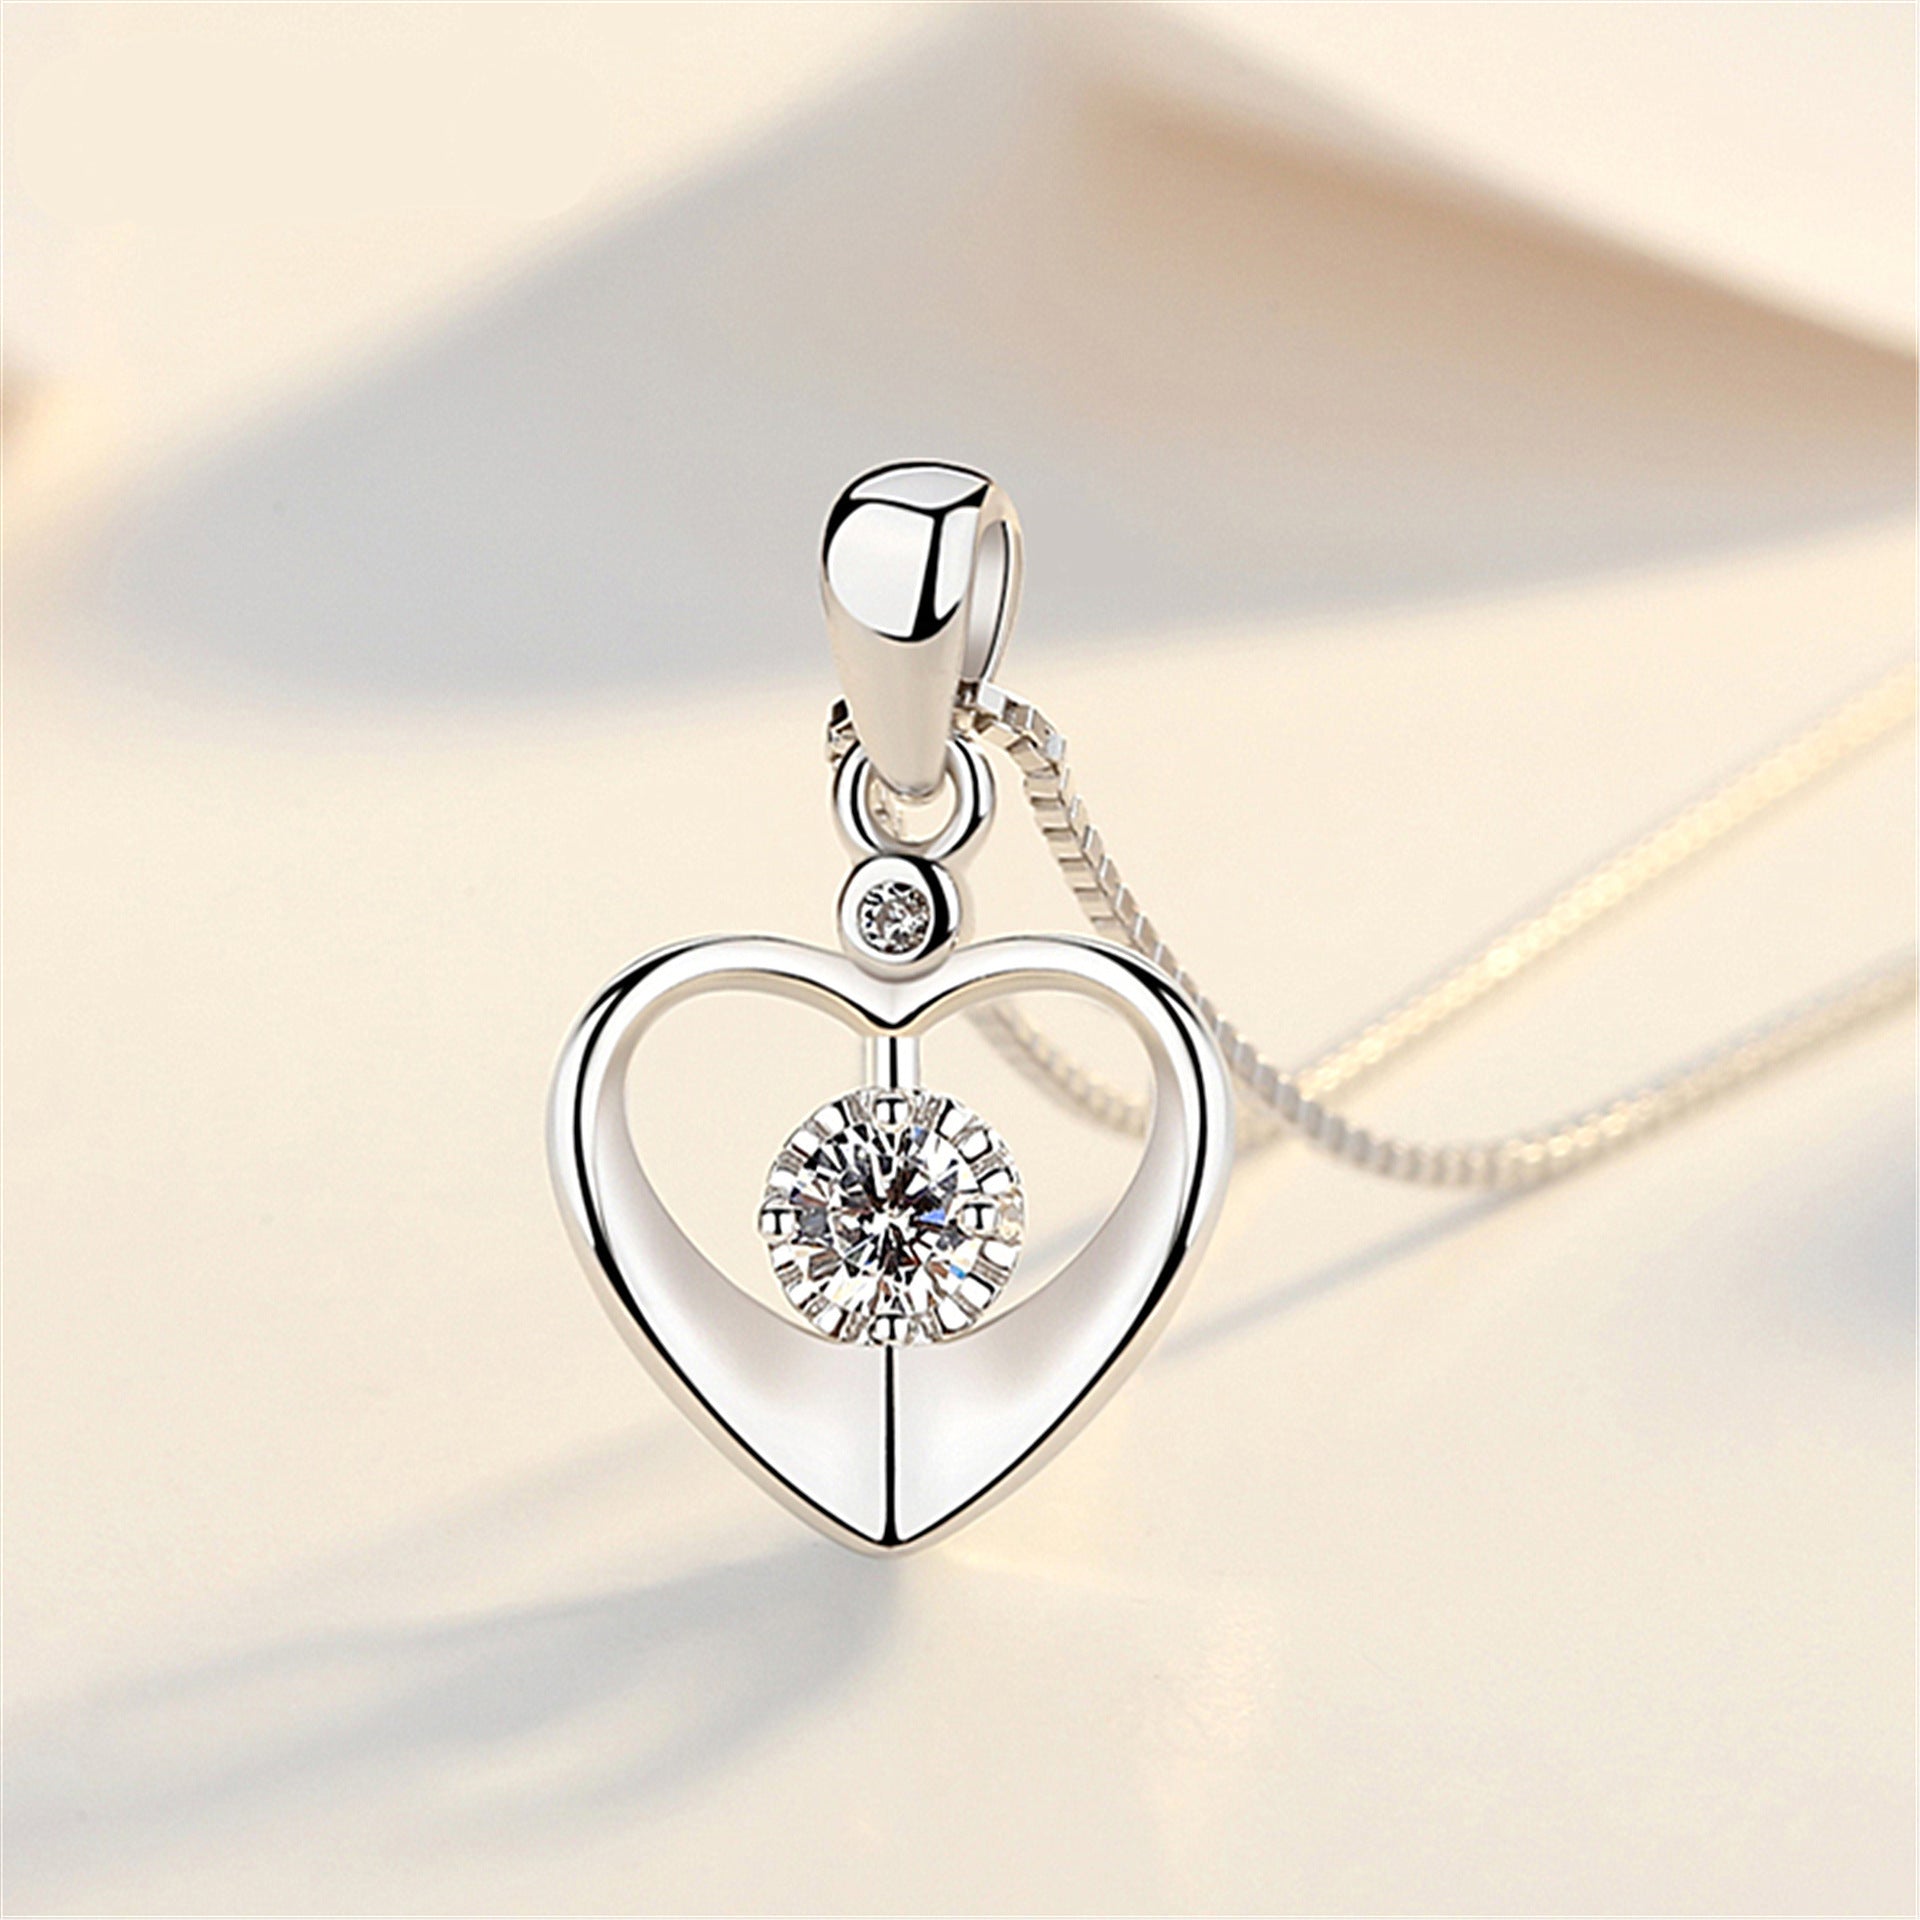 Silver Heart Pendant Necklace - SELFTRITSS